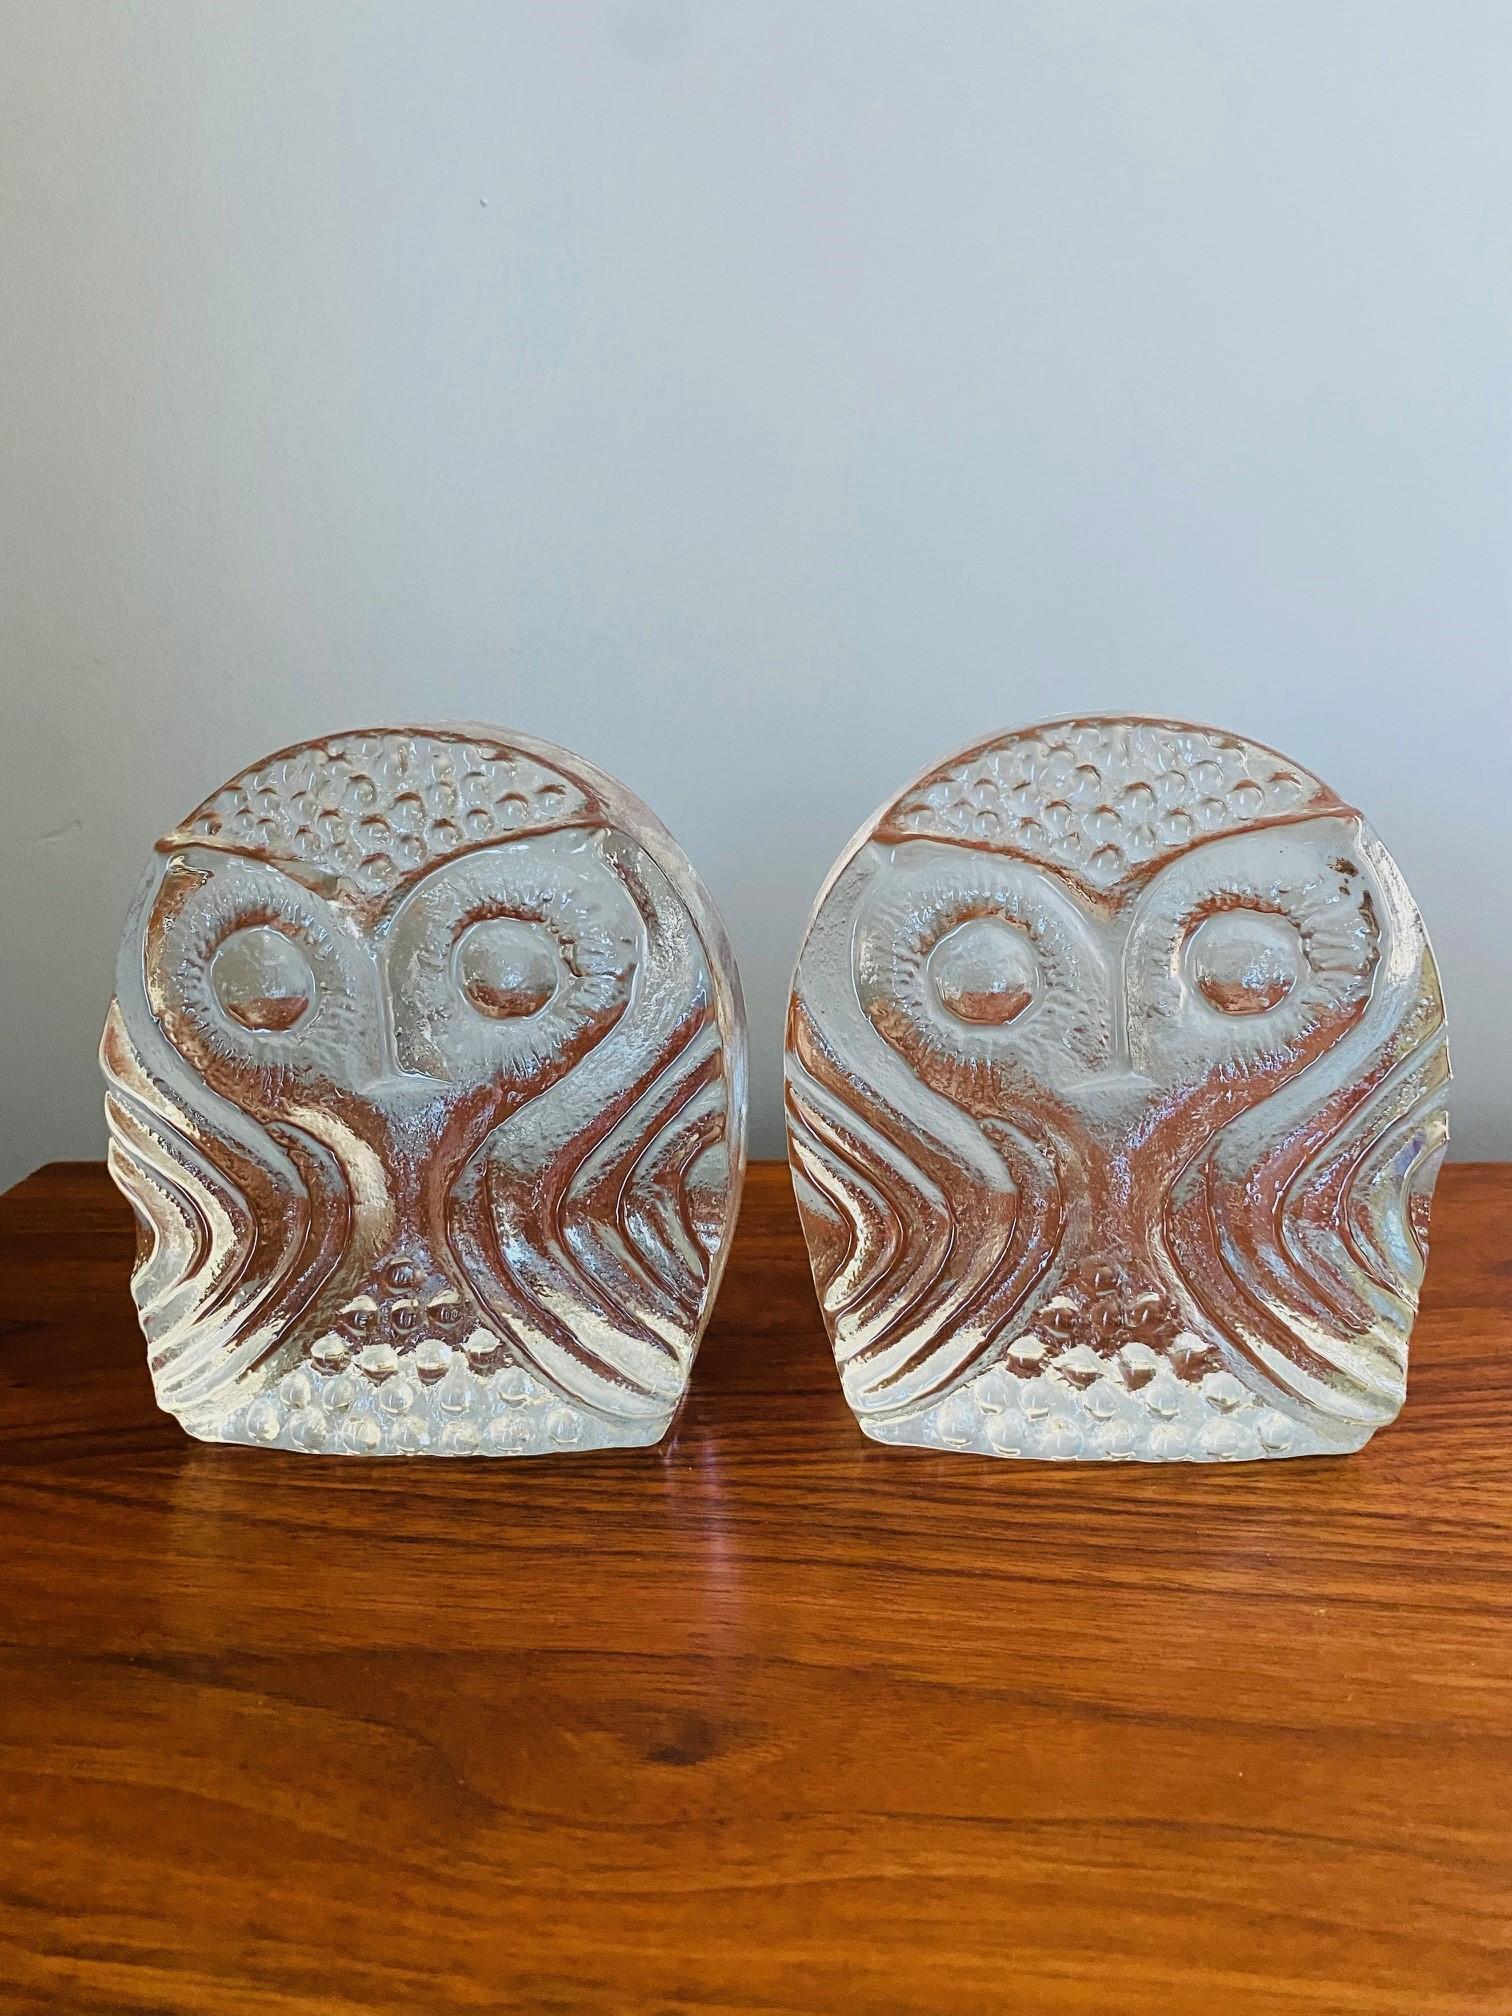 Vintage Midcentury Glass Owl Bookends by Blenko In Good Condition For Sale In San Diego, CA